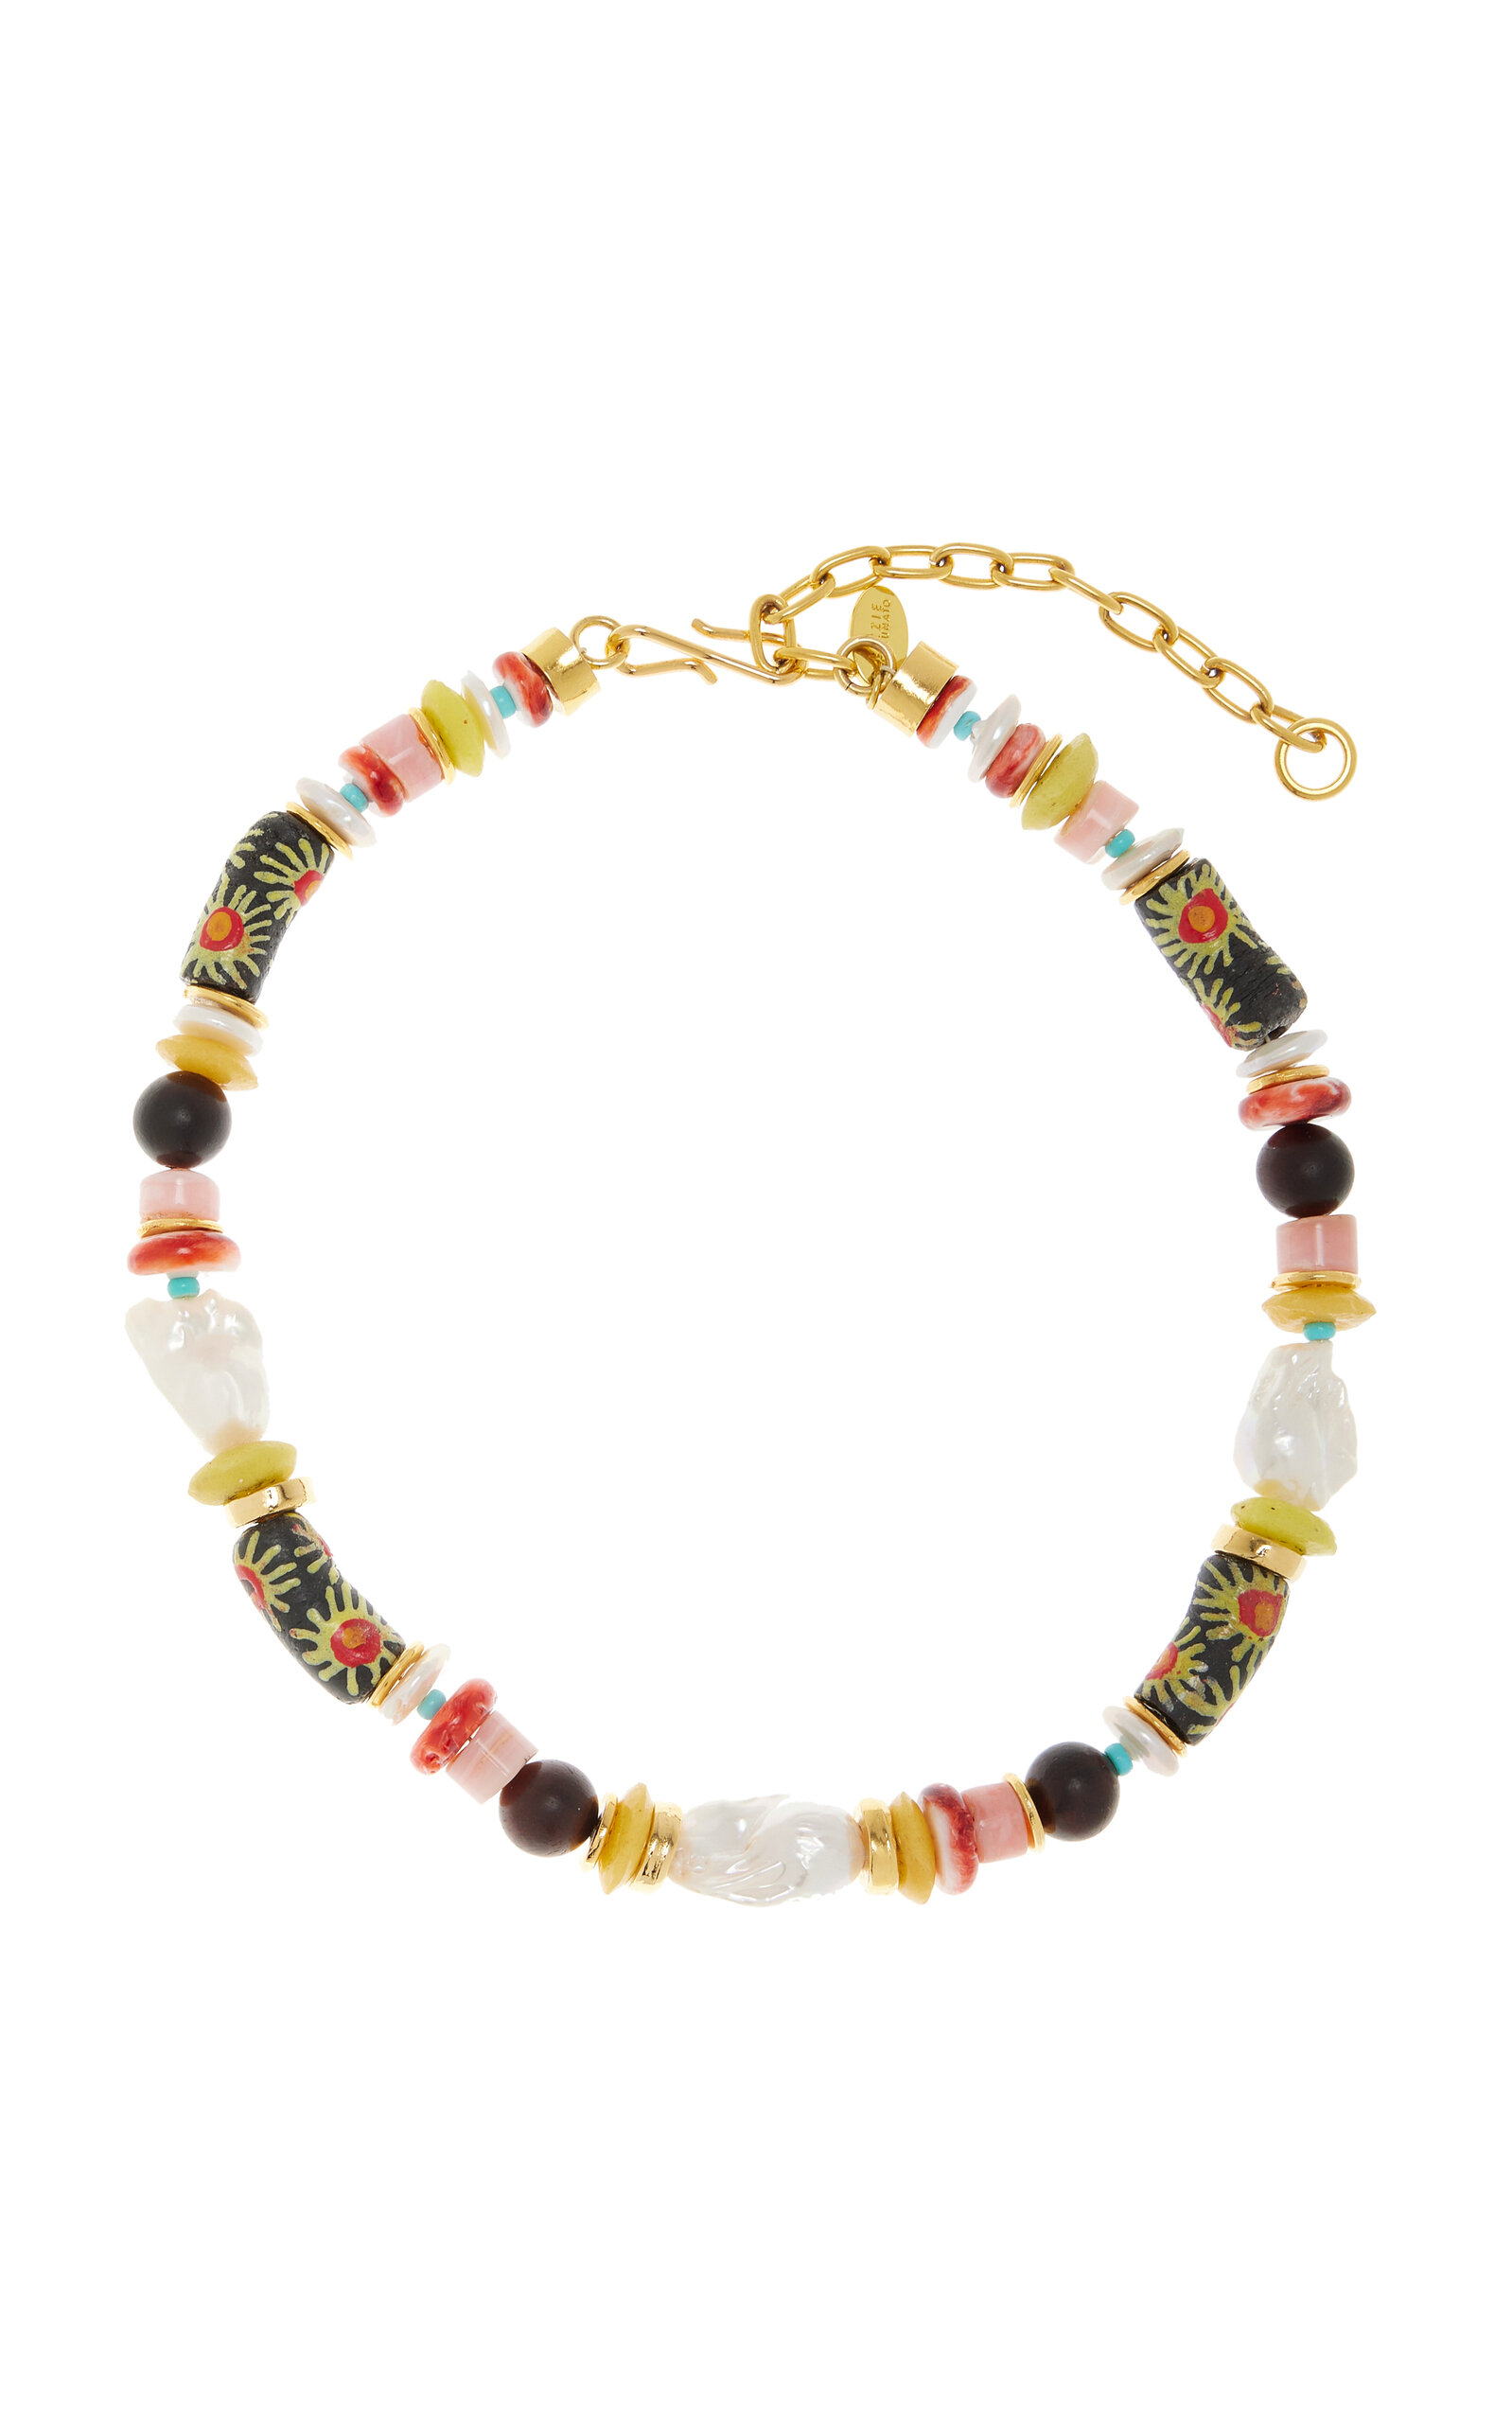 Souvenir Gold-Plated Beaded Necklace